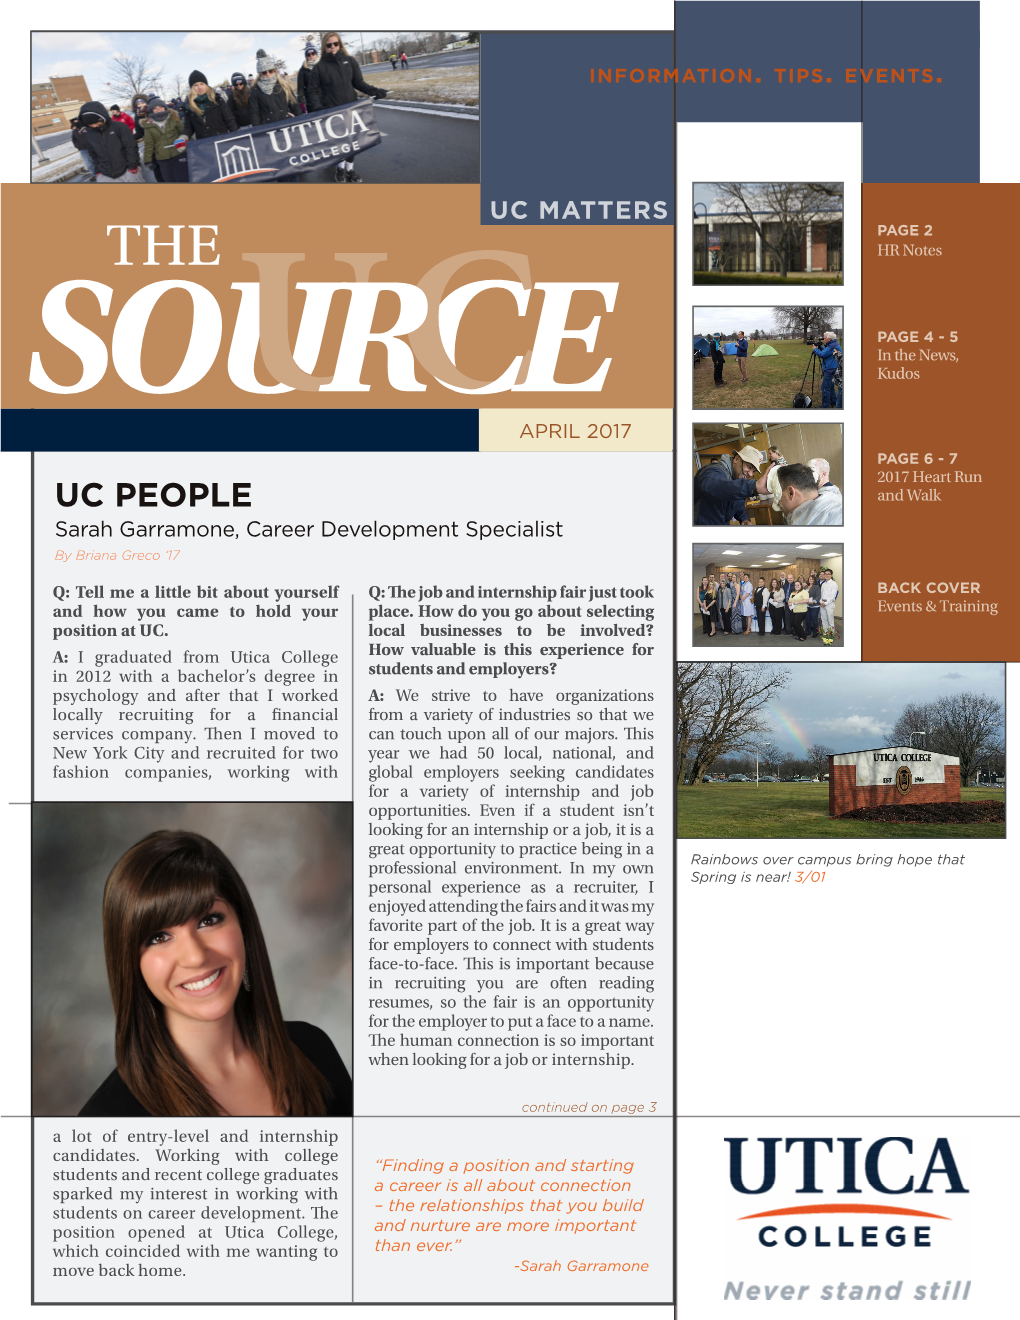 APRIL 2017 PAGE 6 - 7 2017 Heart Run UC PEOPLE and Walk Sarah Garramone, Career Development Specialist by Briana Greco ‘17